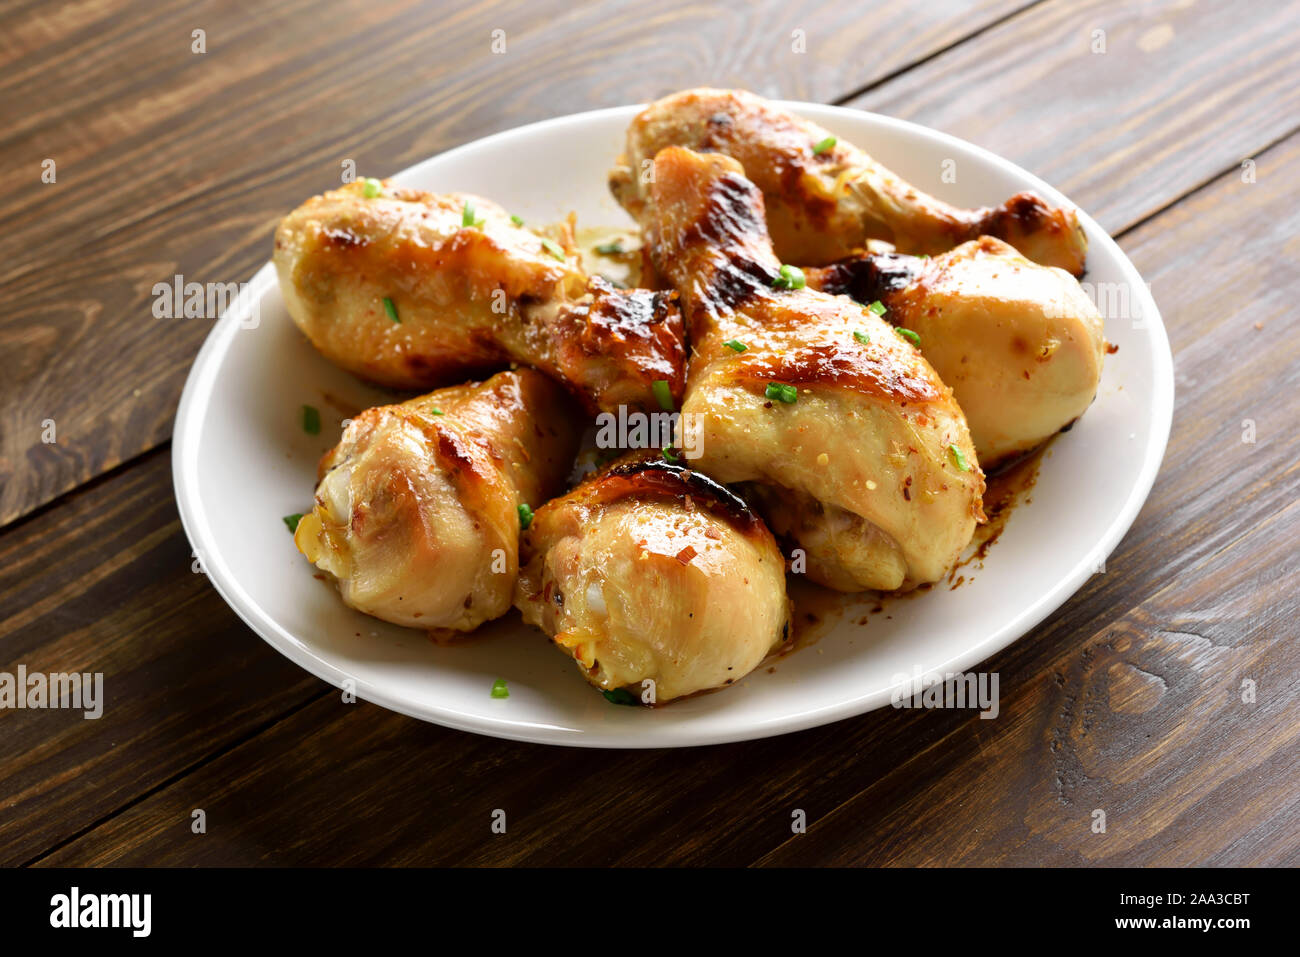 Fried chicken drumsticks on white plate, close up view Stock Photo